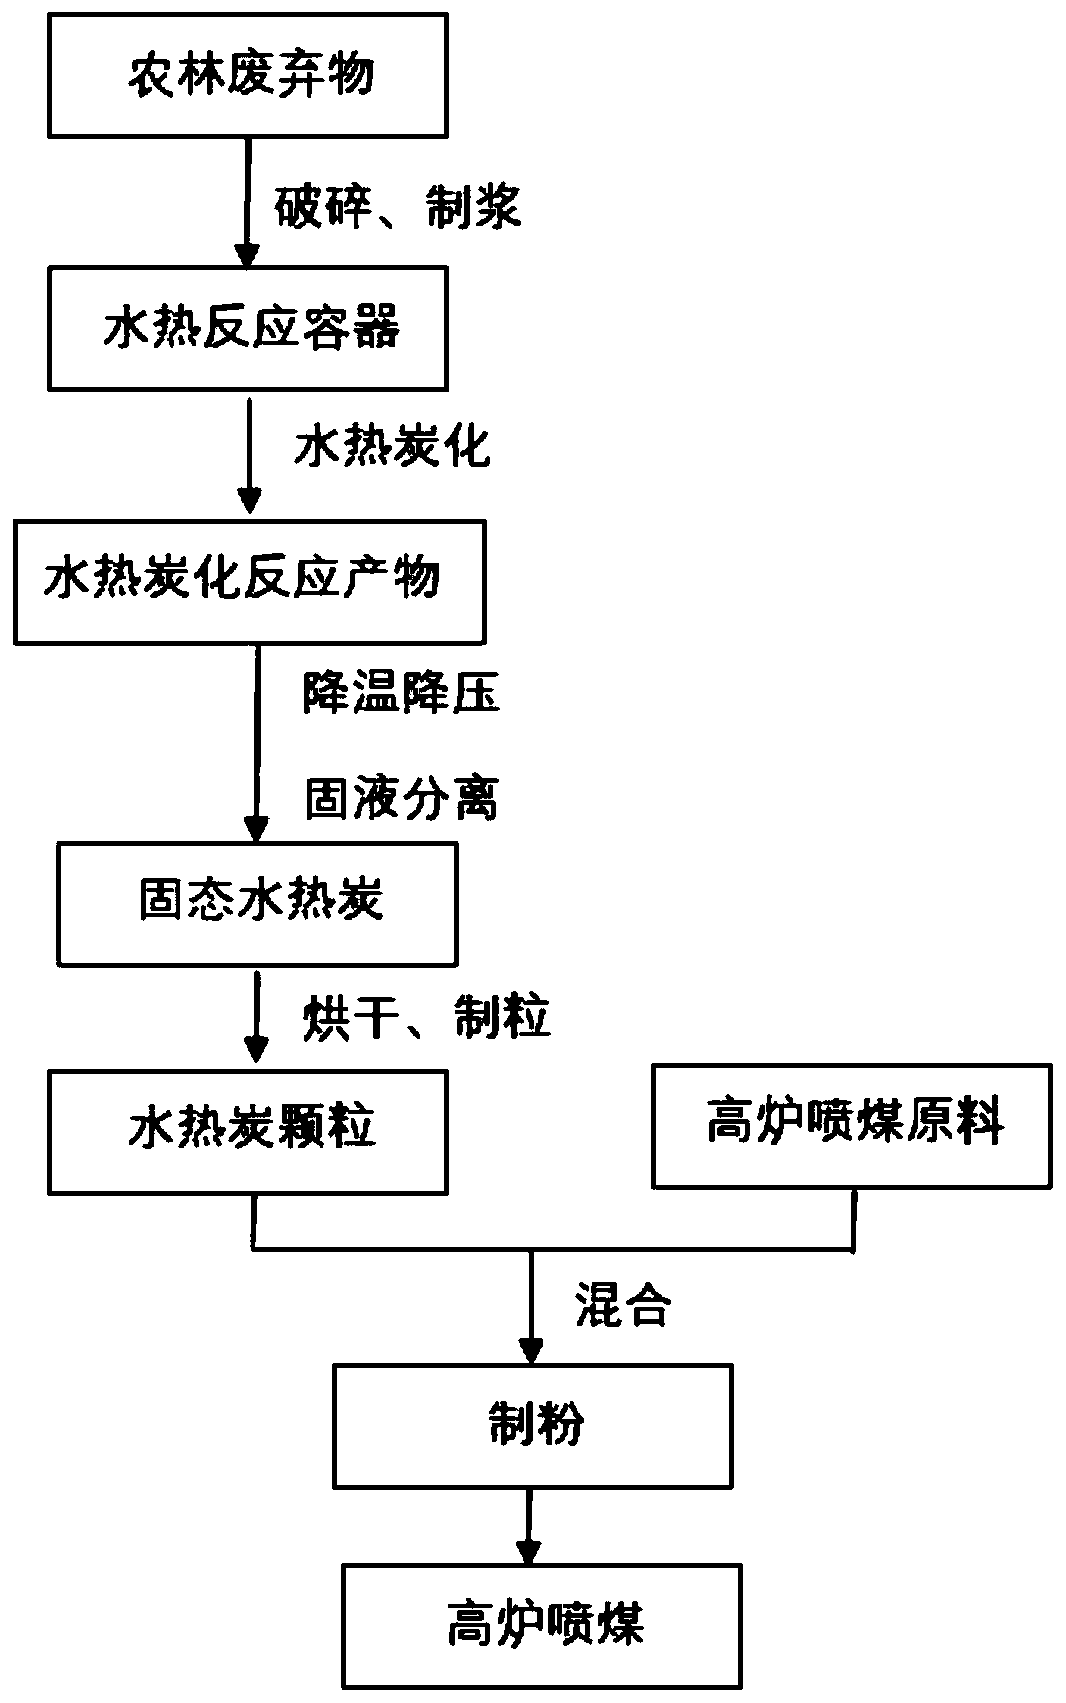 A process based on hydrothermal reaction treatment of agricultural and forestry wastes to prepare carbonized products for blast furnace coal injection